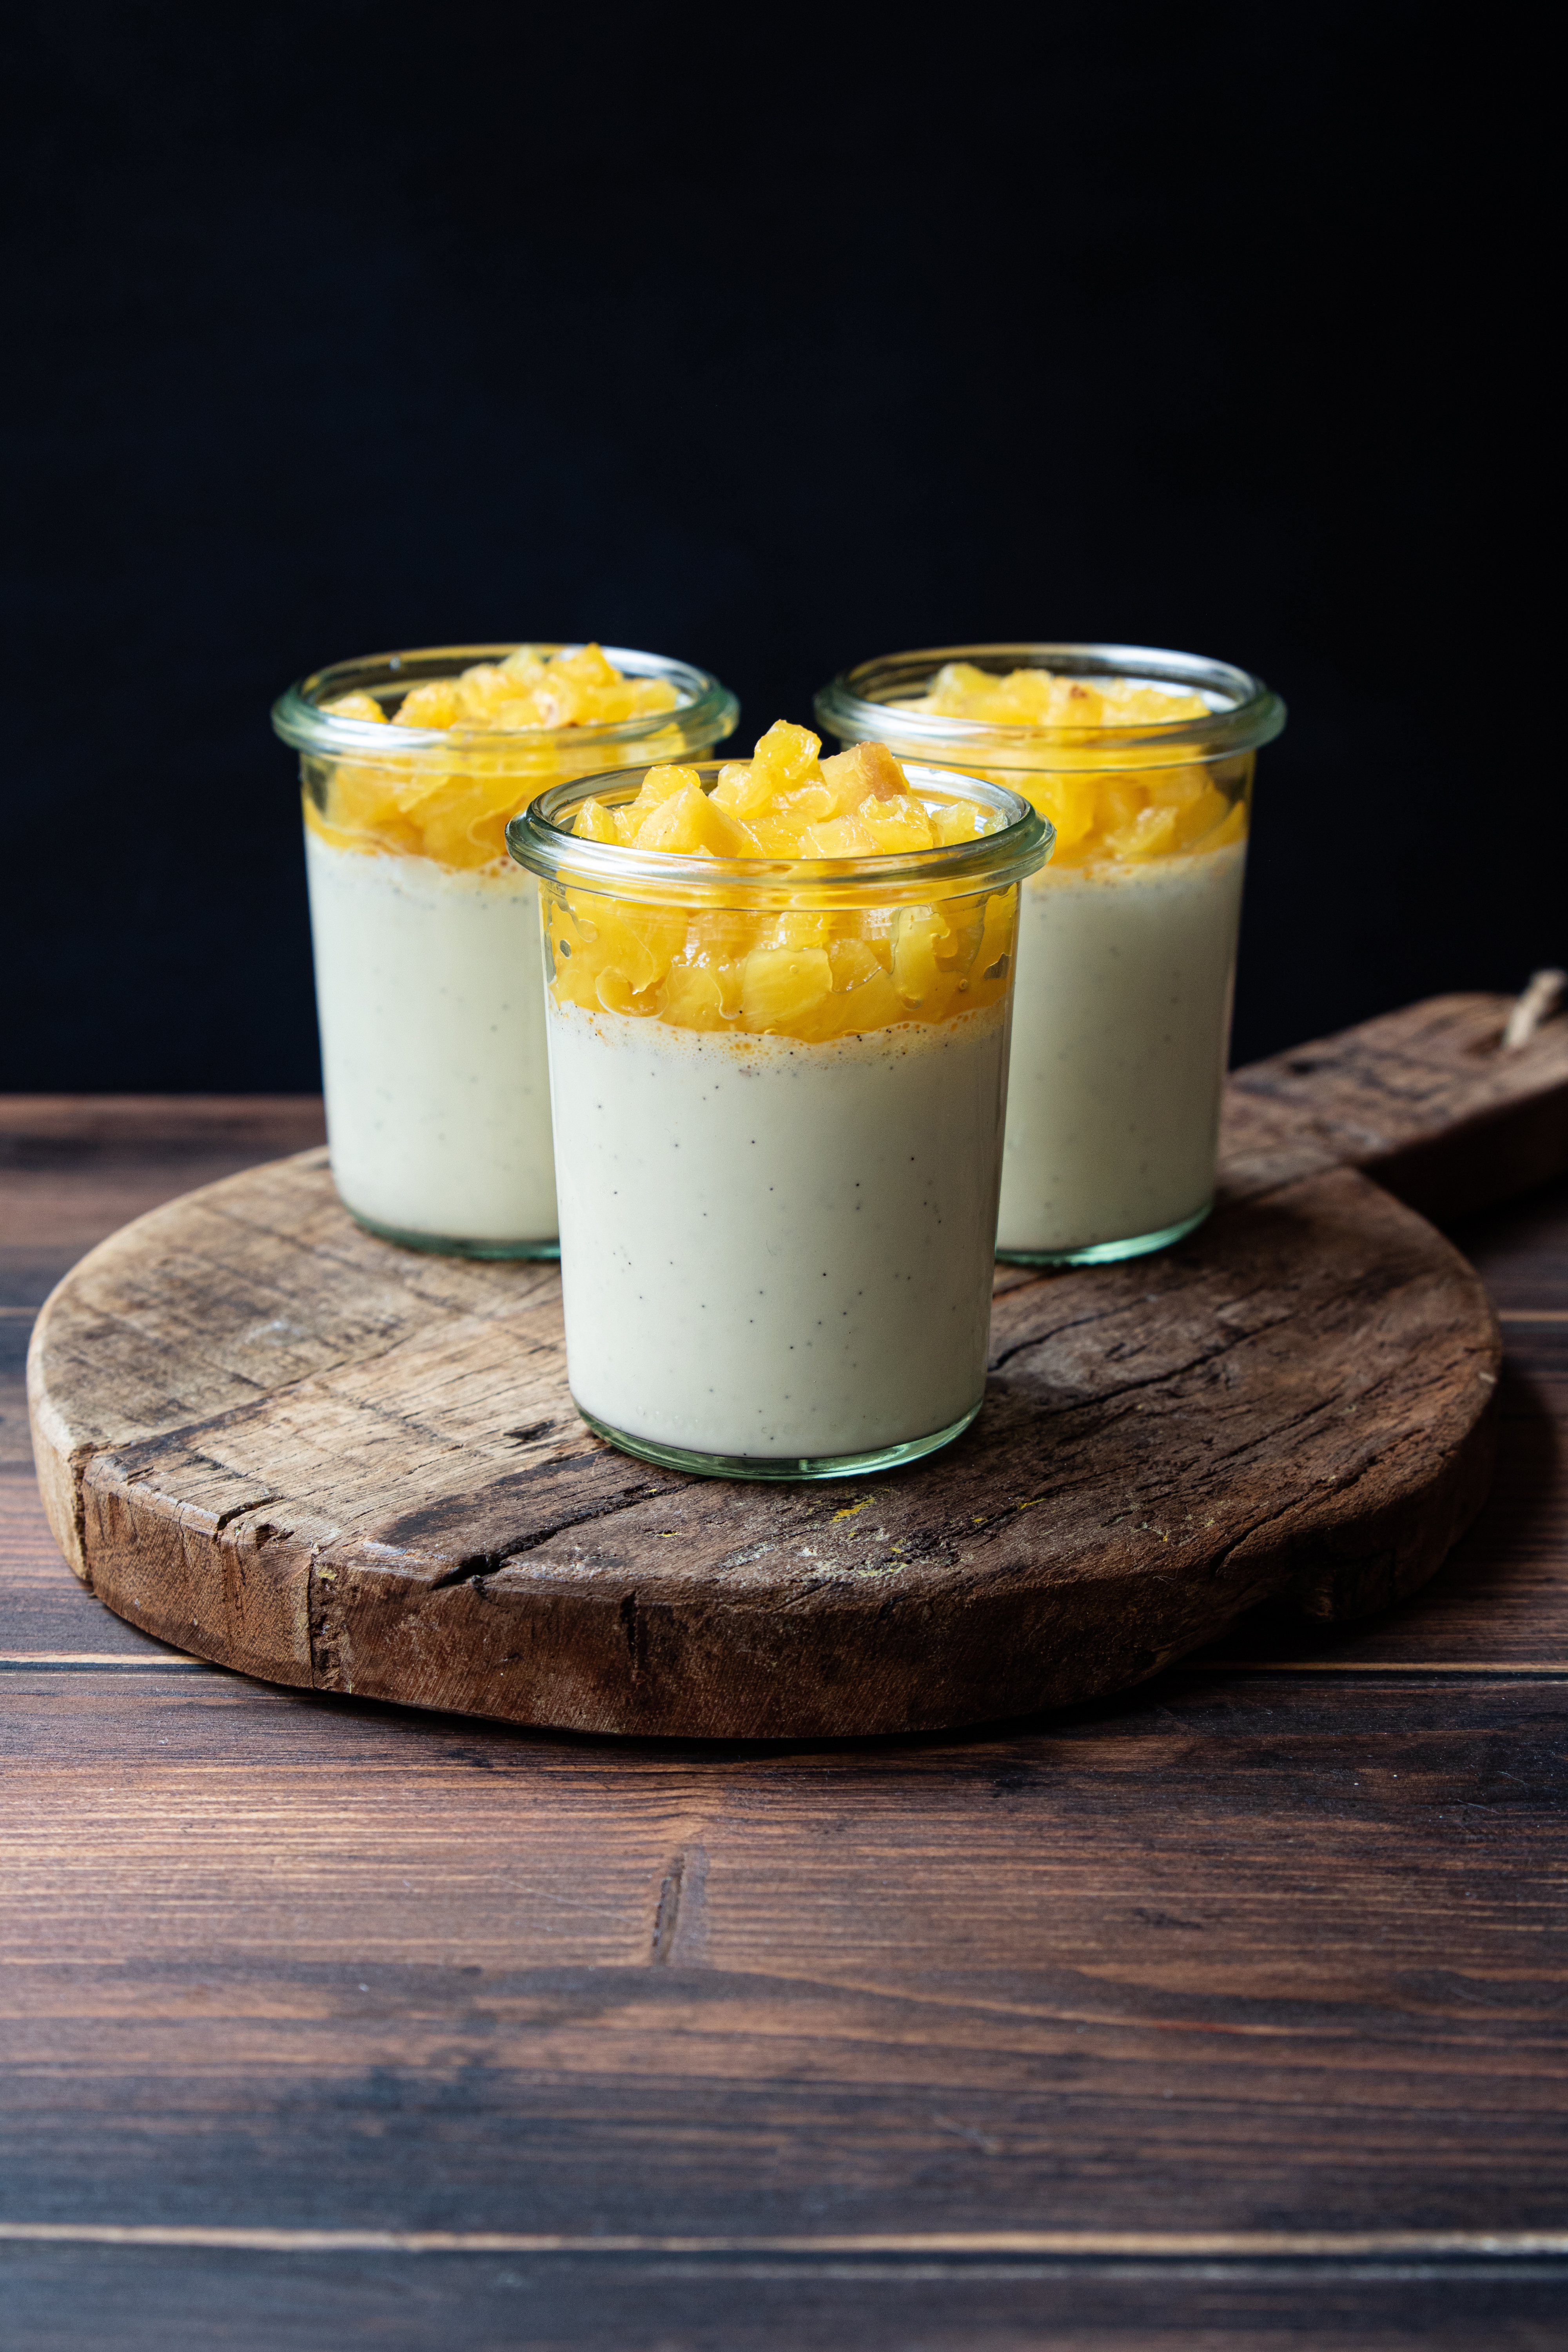 VANILLA PANA COTTA TOPPED WITH PINEAPPLE COMPOTE